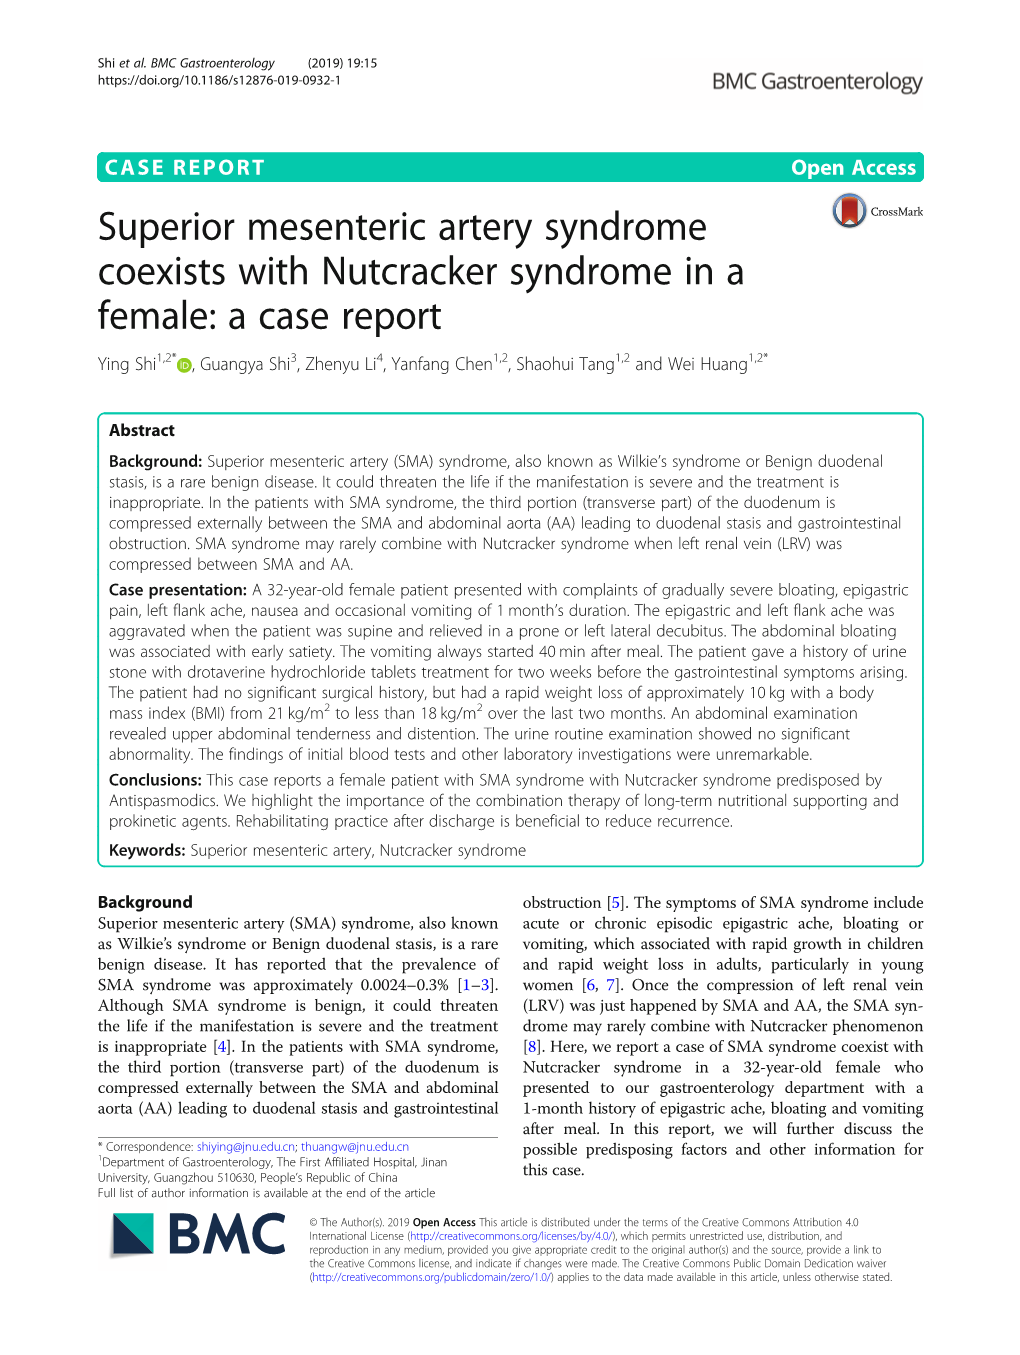 Superior Mesenteric Artery Syndrome Coexists with Nutcracker Syndrome in a Female